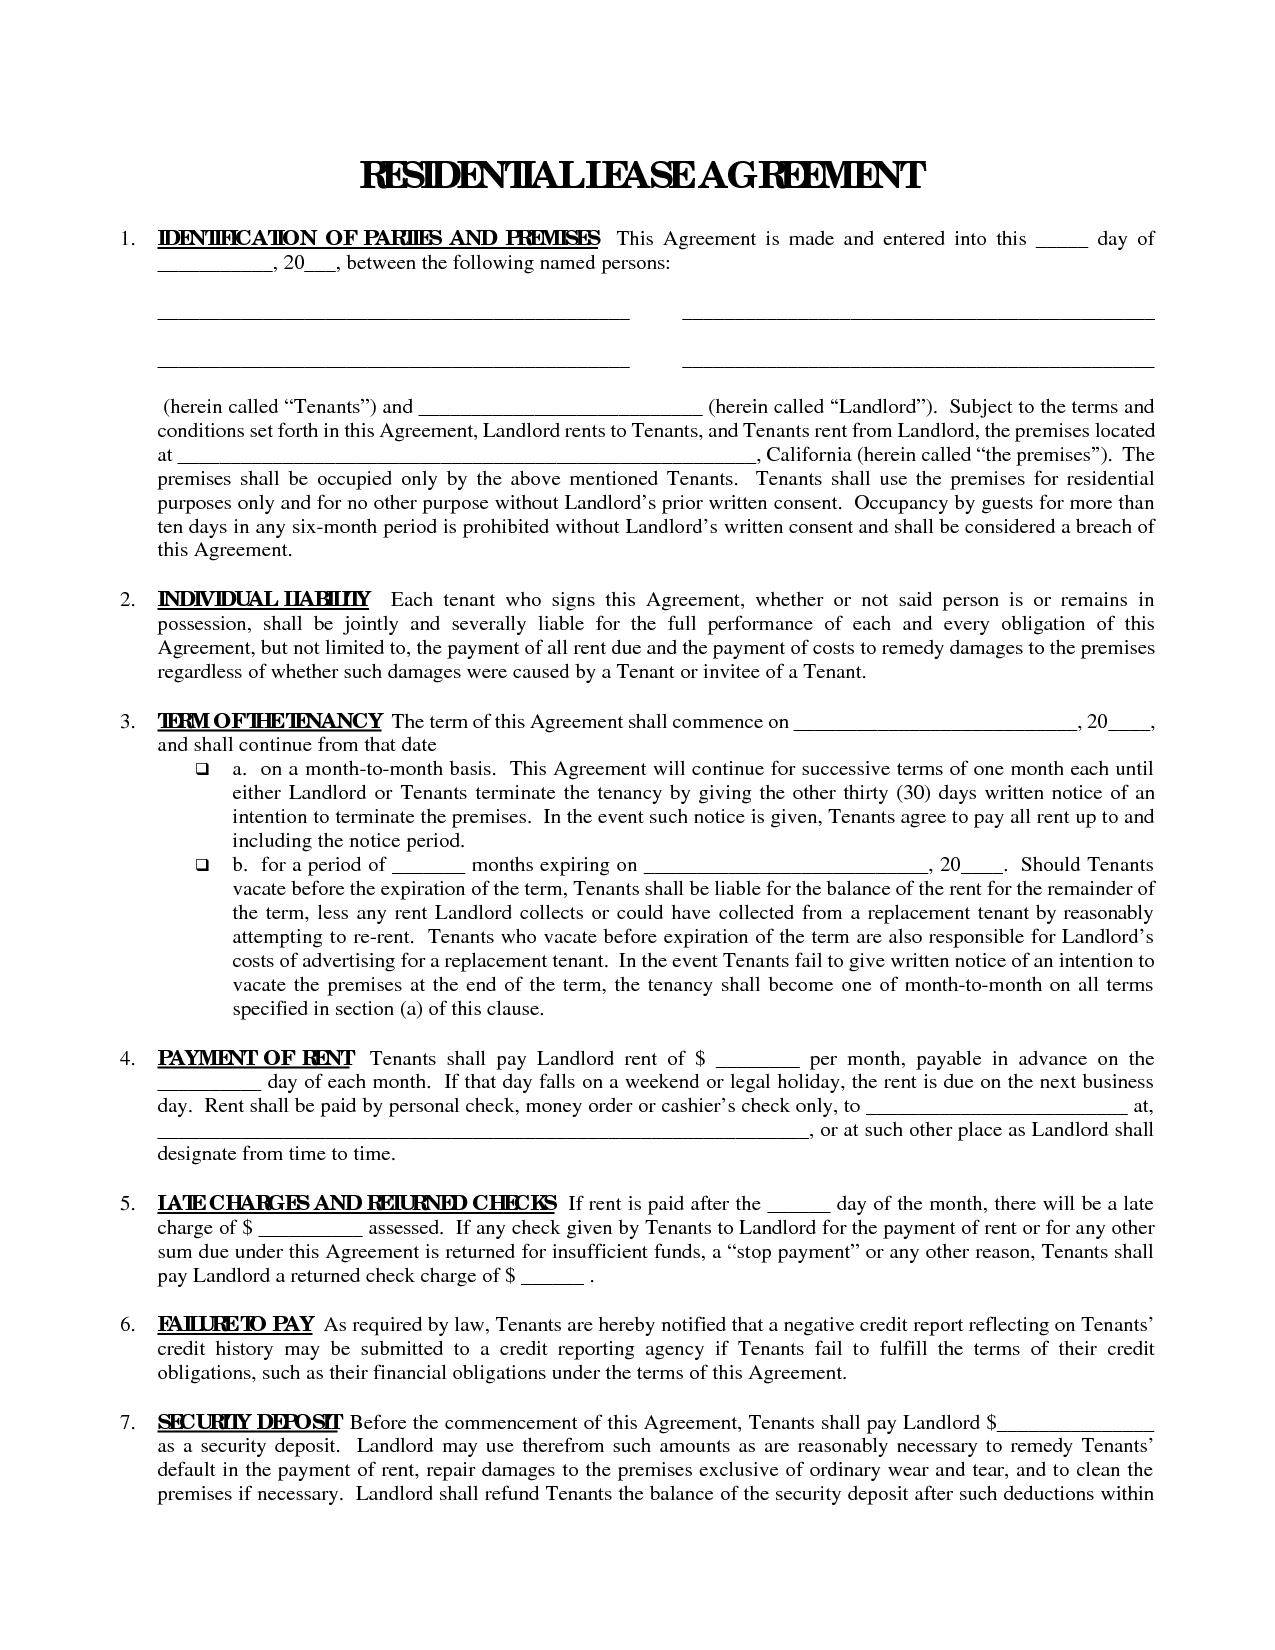 Printable Residential Free House Lease Agreement | Residential Lease - Free Printable Real Estate Contracts